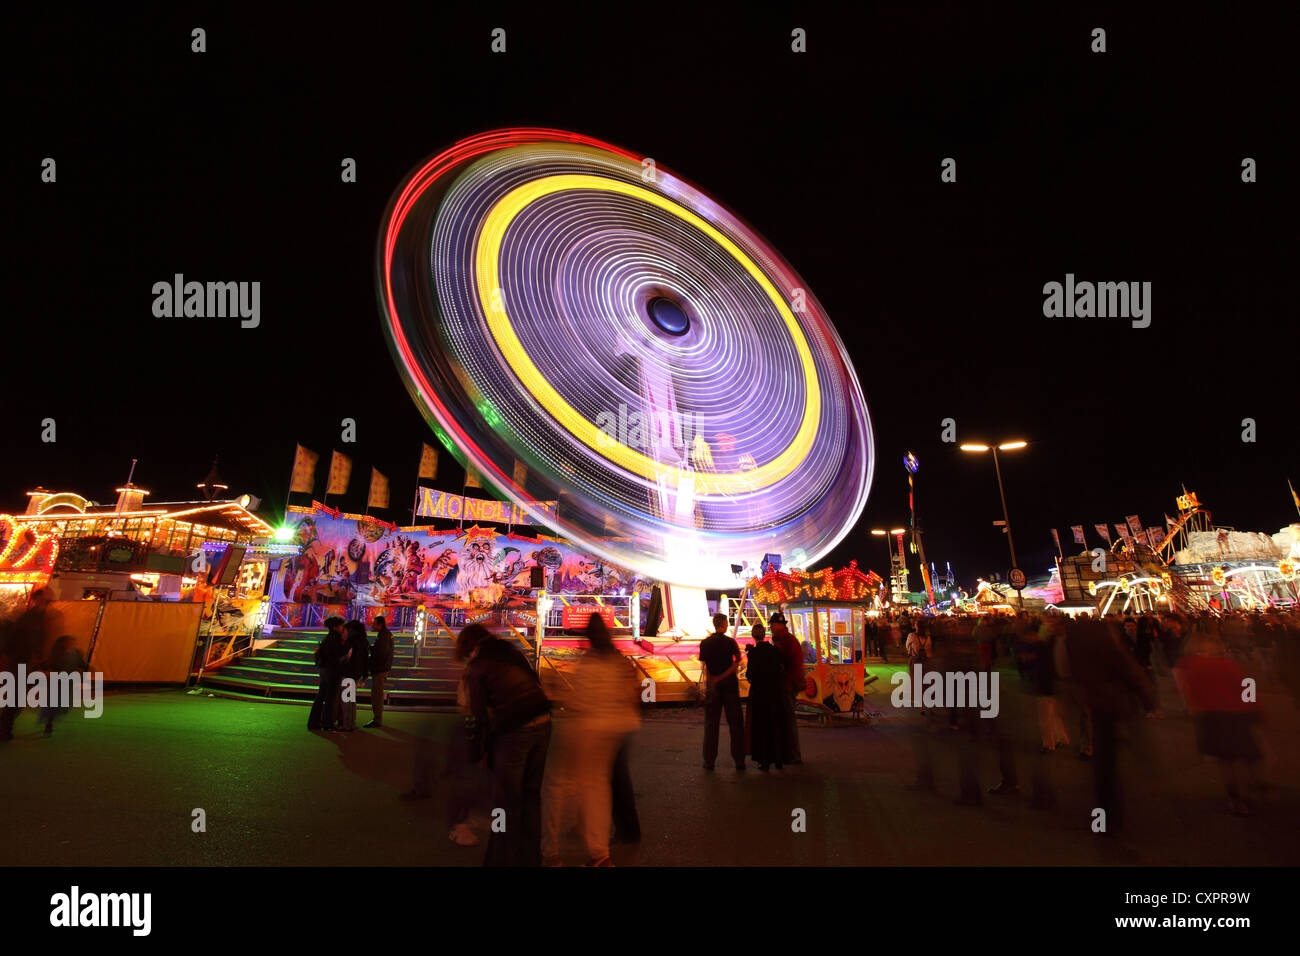 MUNICH, SEP 23: The high ferry wheel at night at the Oktoberfest in Munich on September 23rd 2011, Munich, Germany Stock Photo